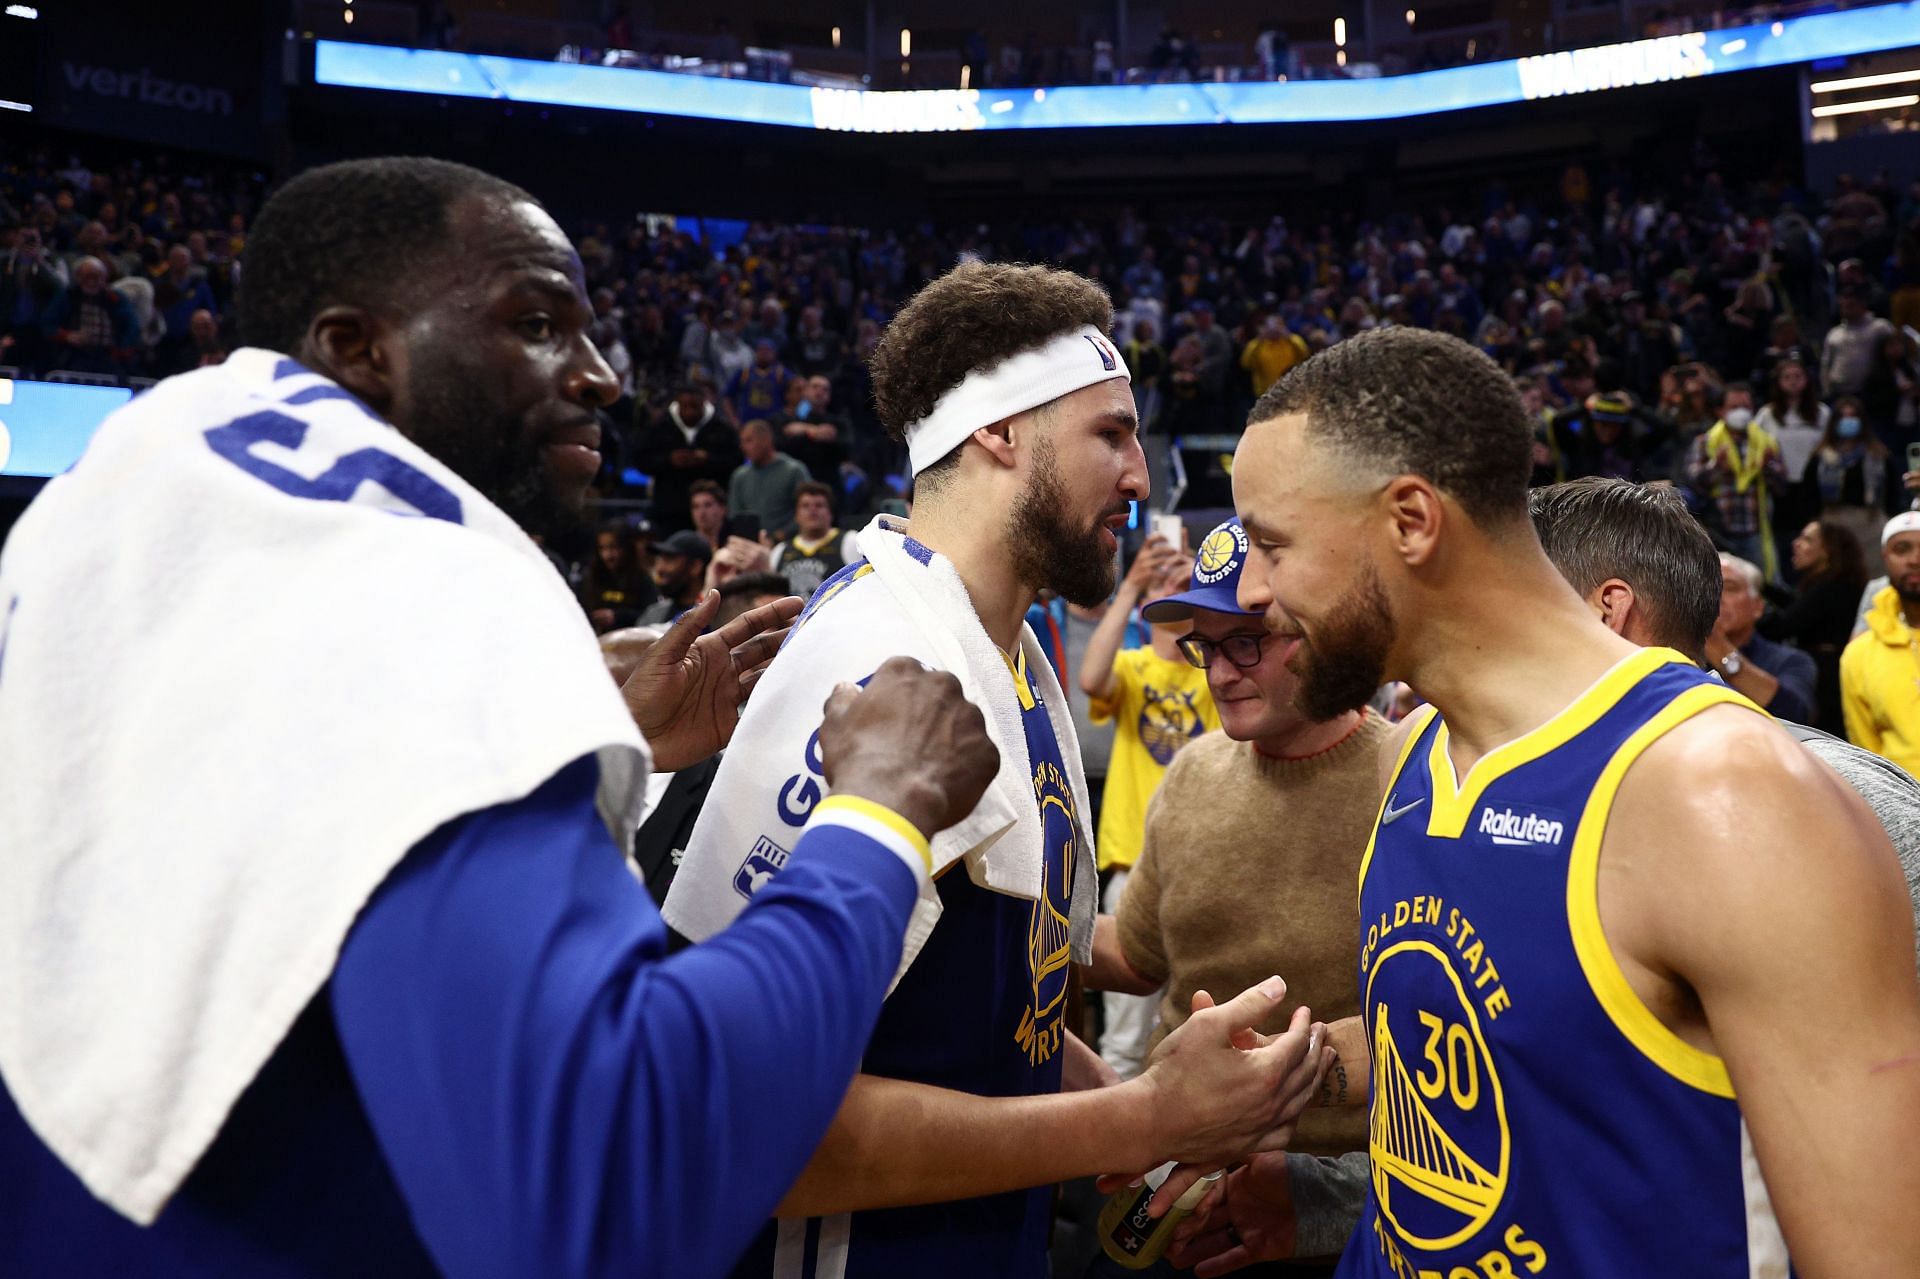 Stephen Curry #30, Klay Thompson #11, and Draymond Green #23 of the Golden State Warriors